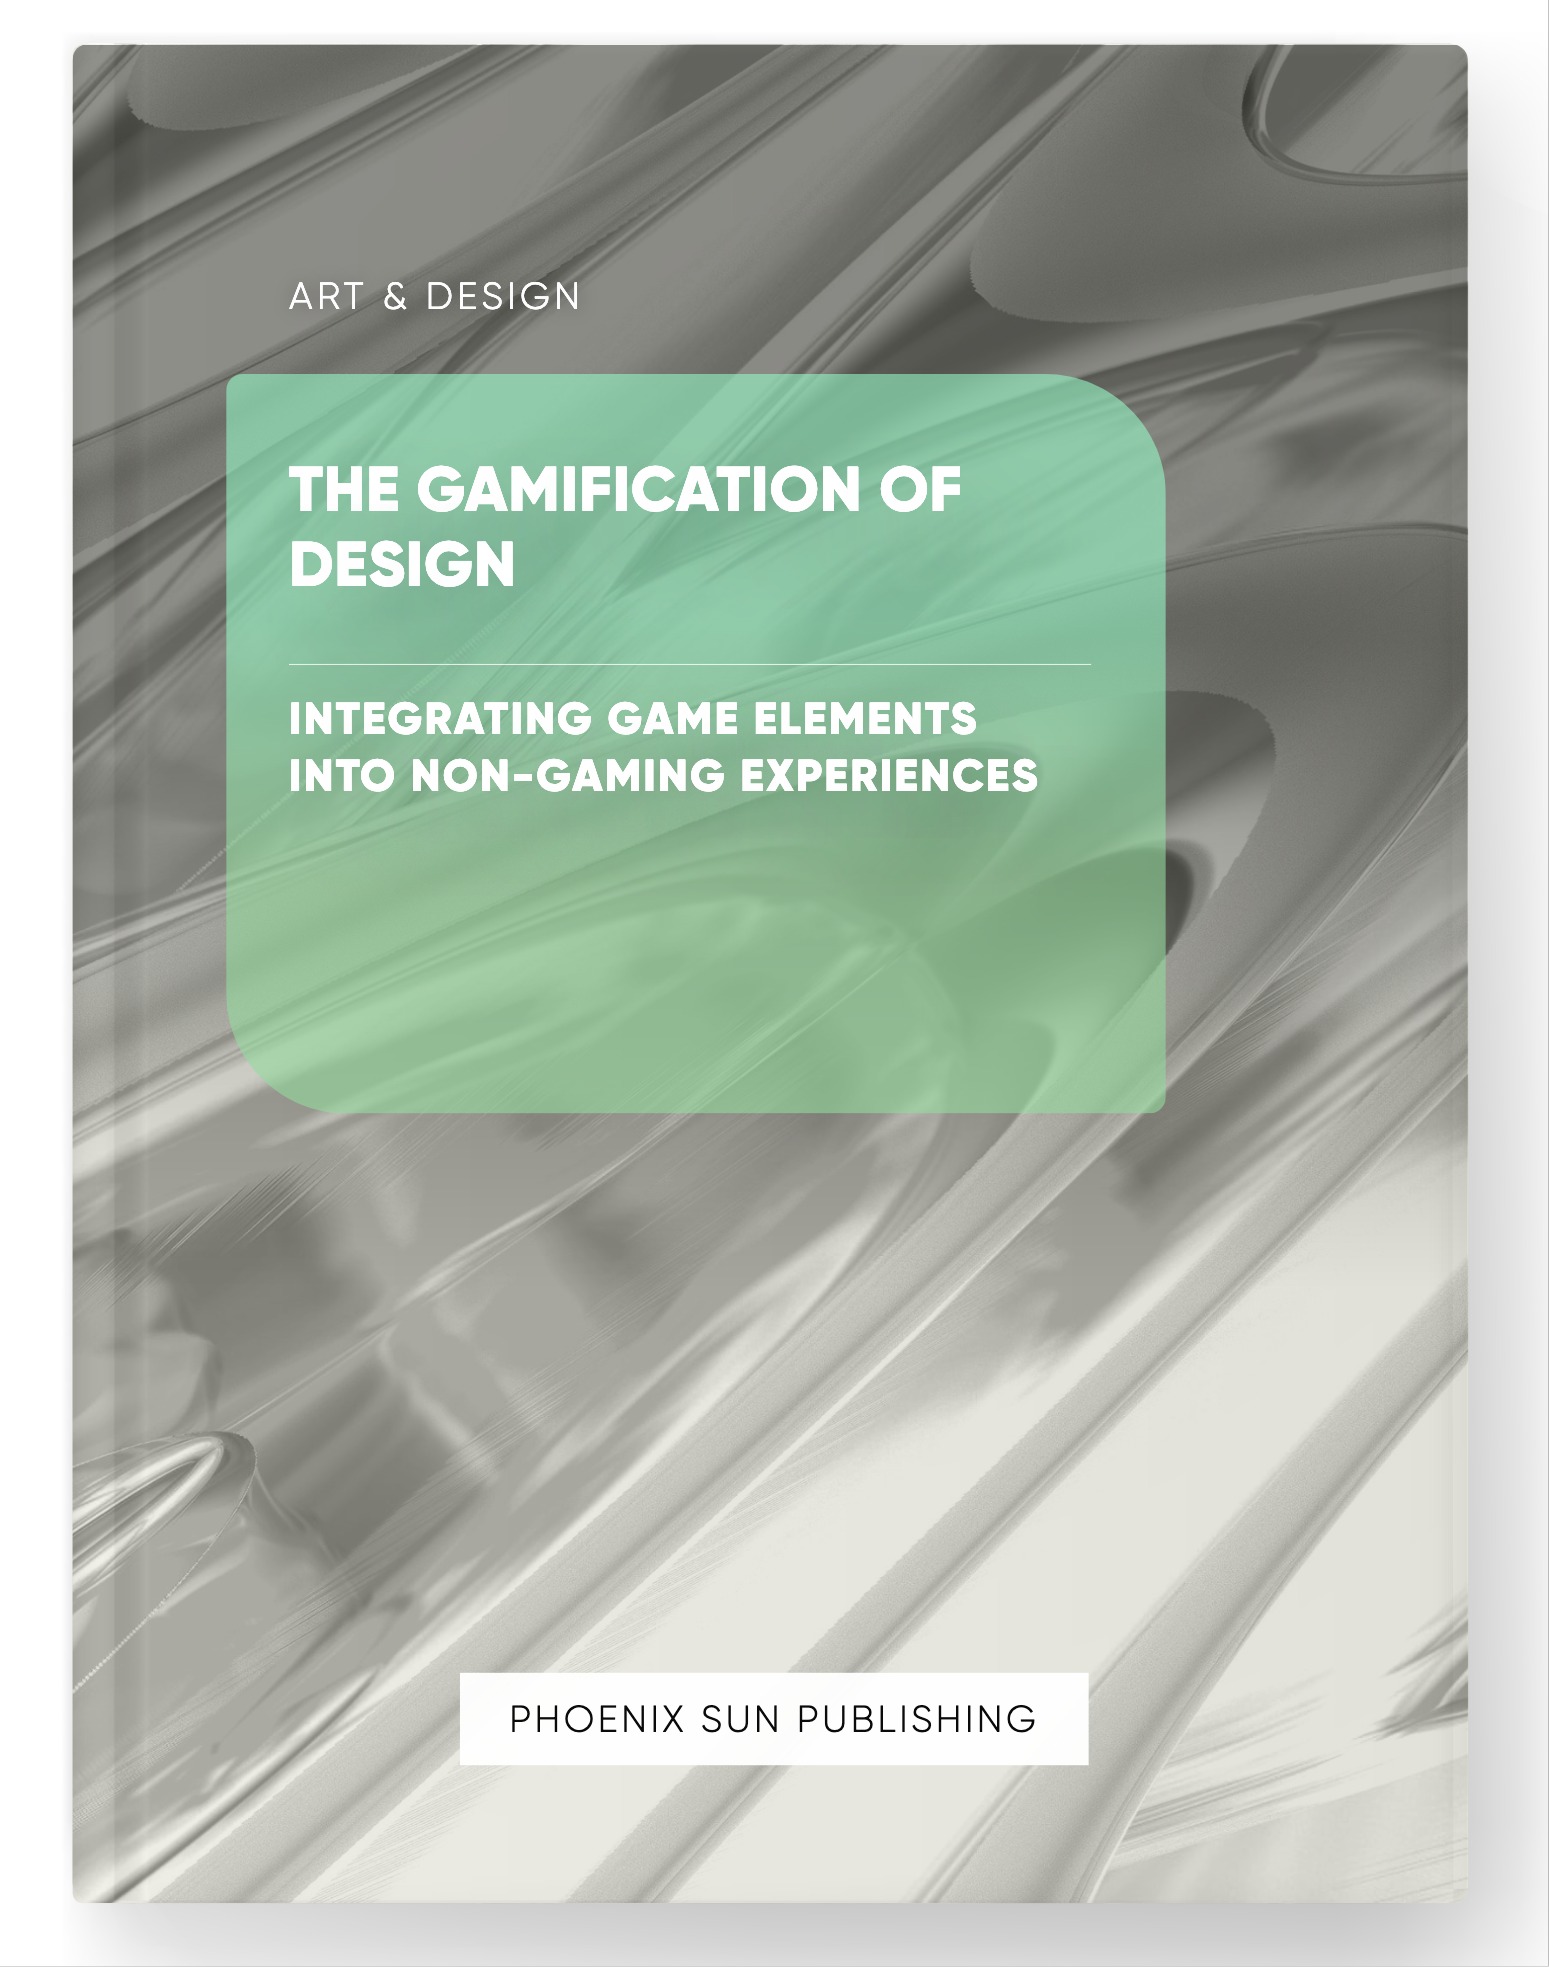 The Gamification of Design – Integrating Game Elements into Non-Gaming Experiences